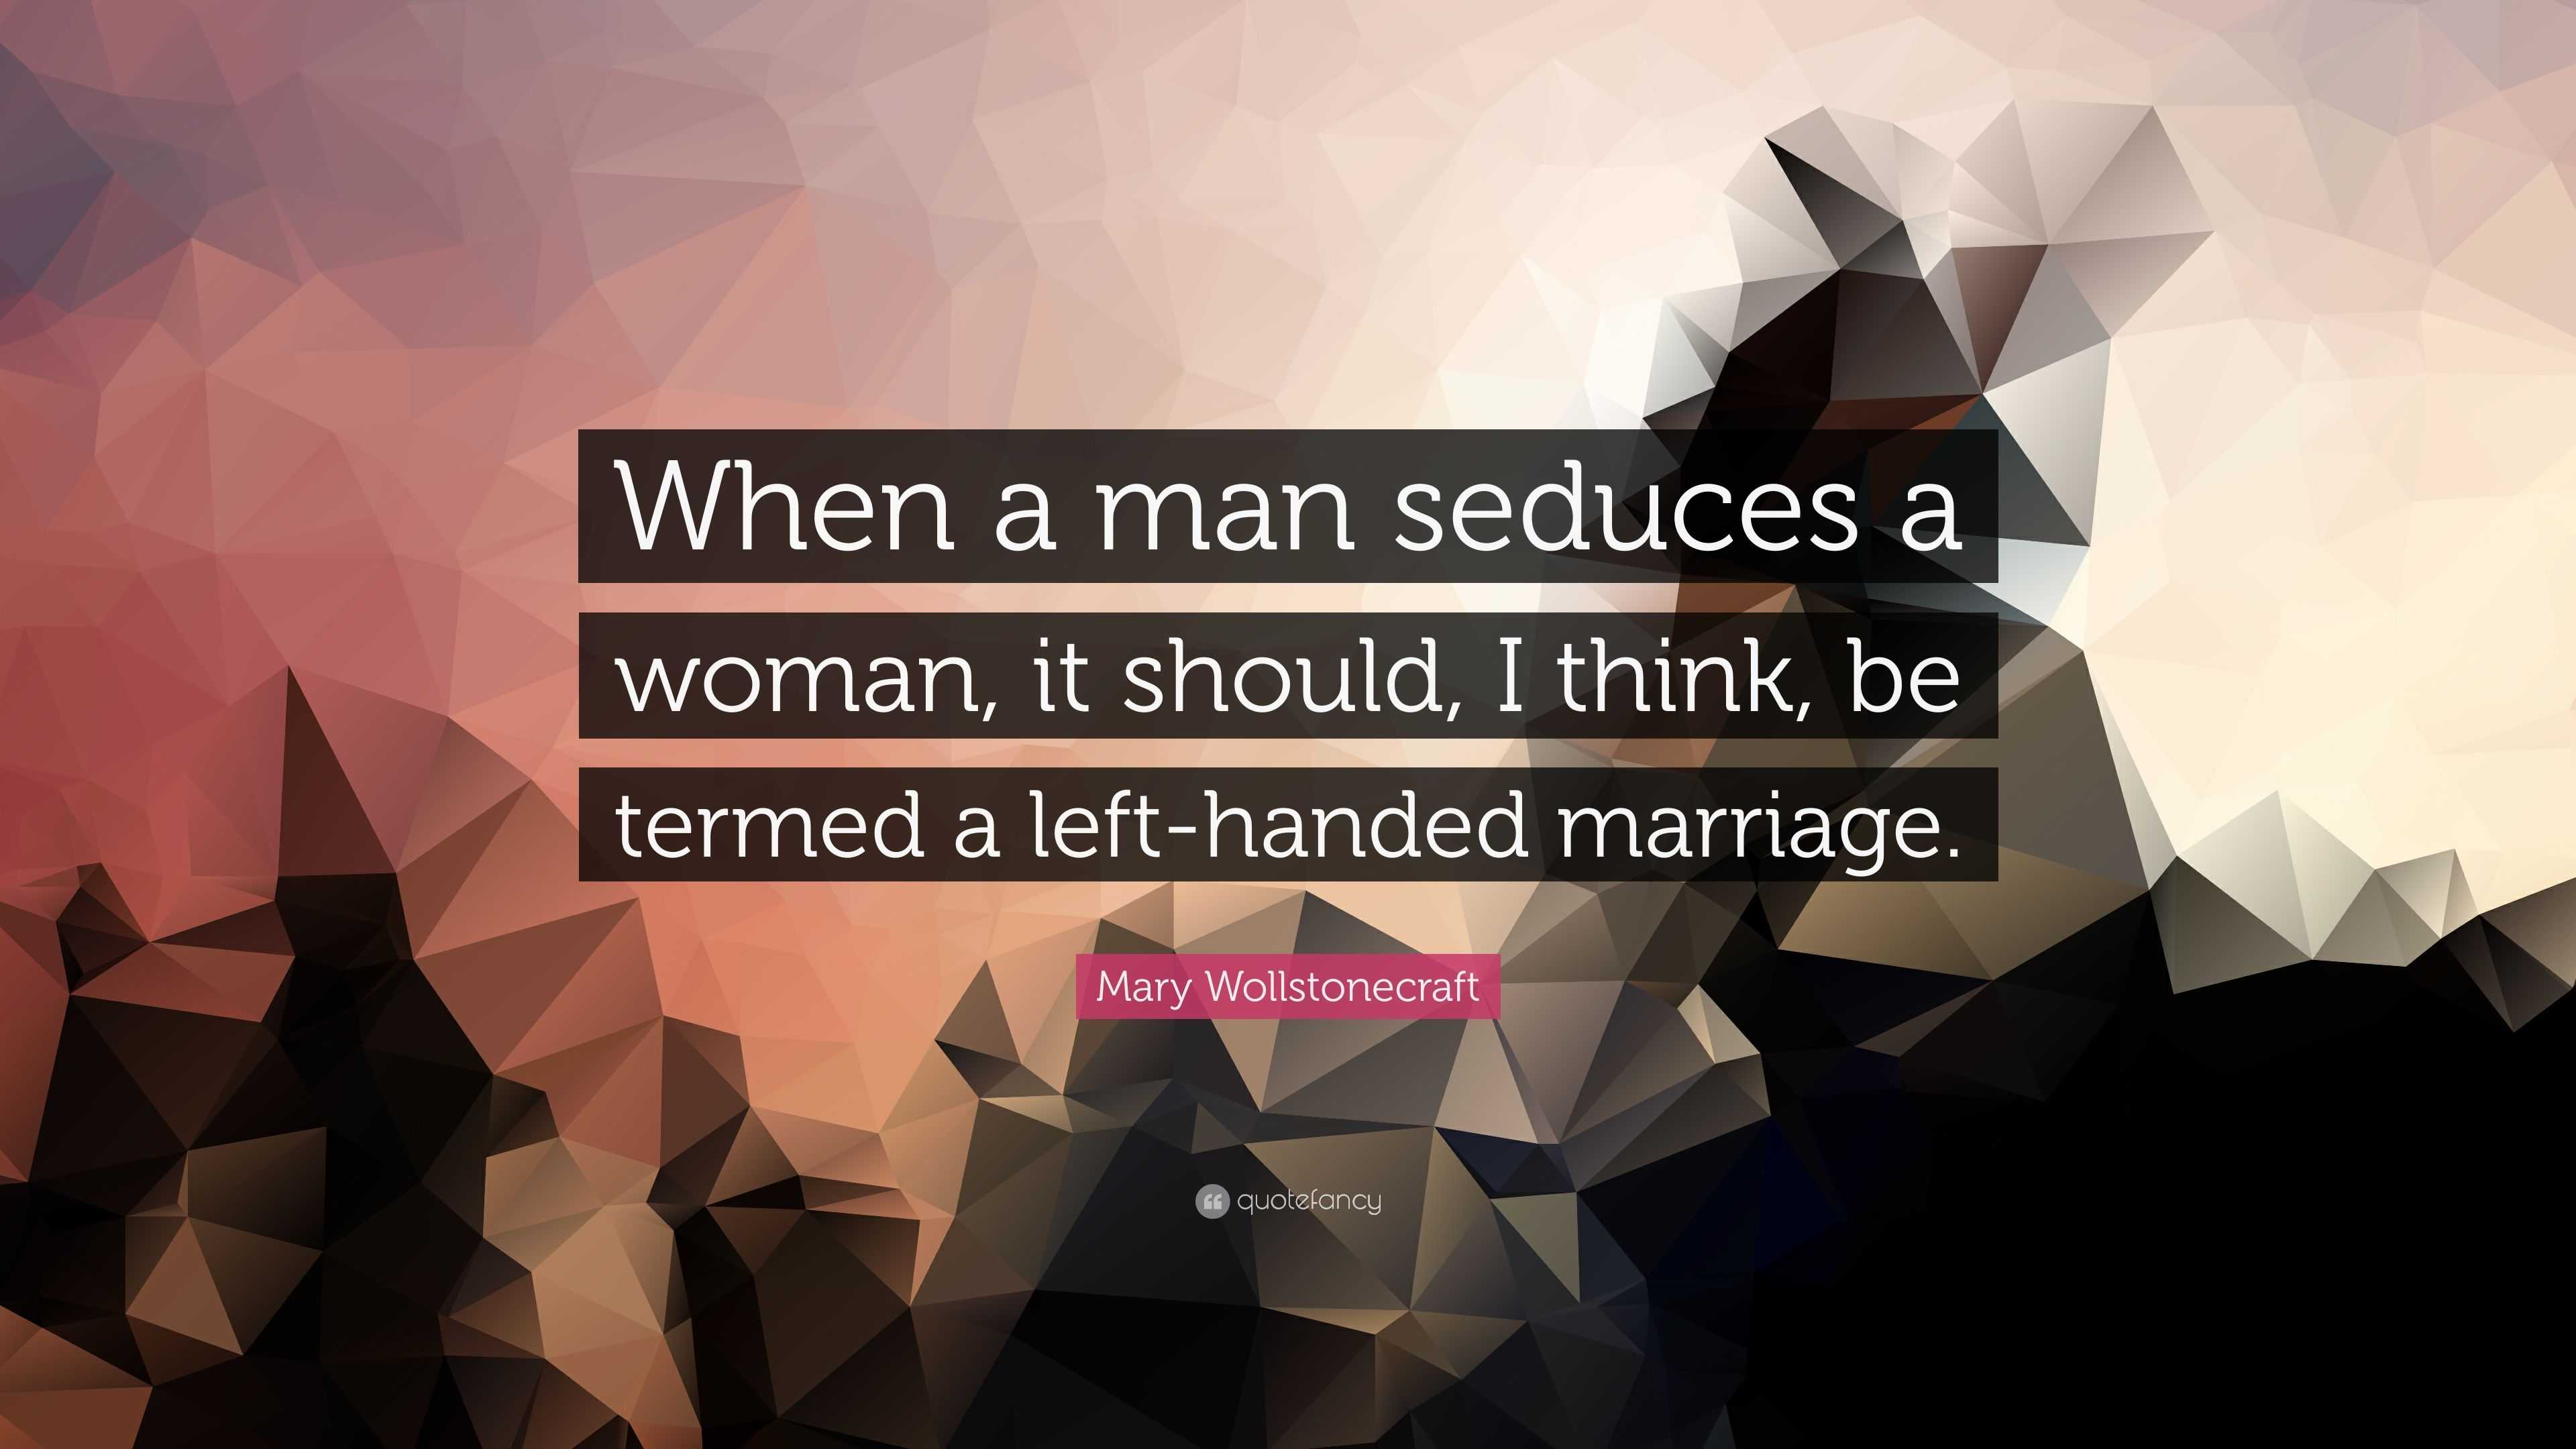 Mary Wollstonecraft Quote: “When a man seduces a woman, it should, I ...